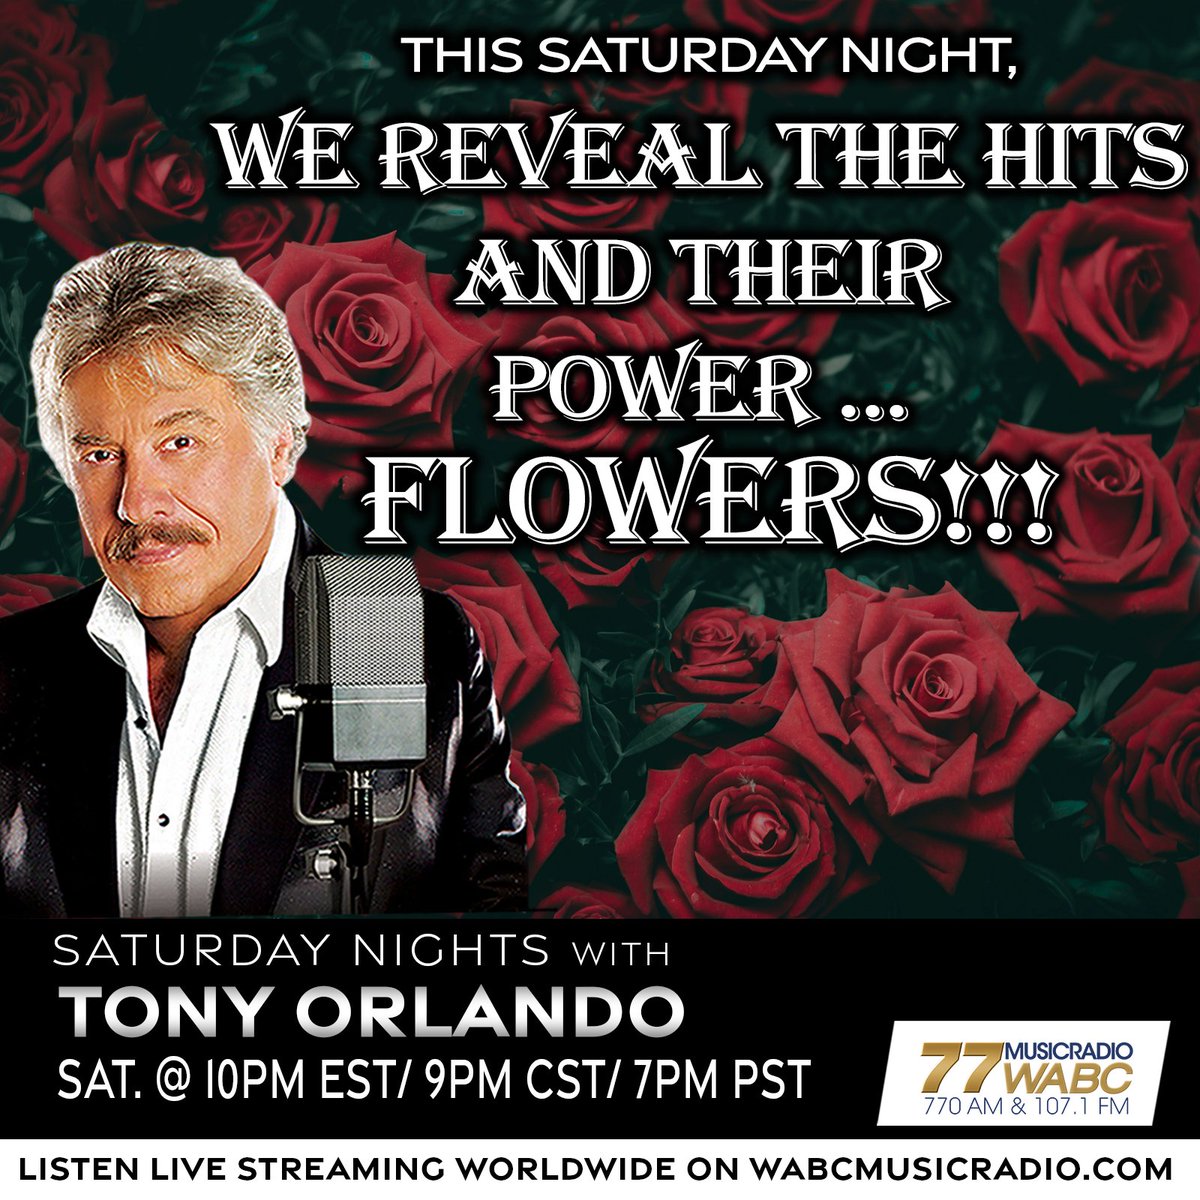 TONIGHT at 10PM: Host @TonyOrlando will reveal The Hits And Their Power…FLOWERS!!! Join us TONIGHT from 10PM-midnight on wabcmusicradio.com, 770 AM, or on the 77 WABC app! #77WABCRadio #Music #TonyOrlando